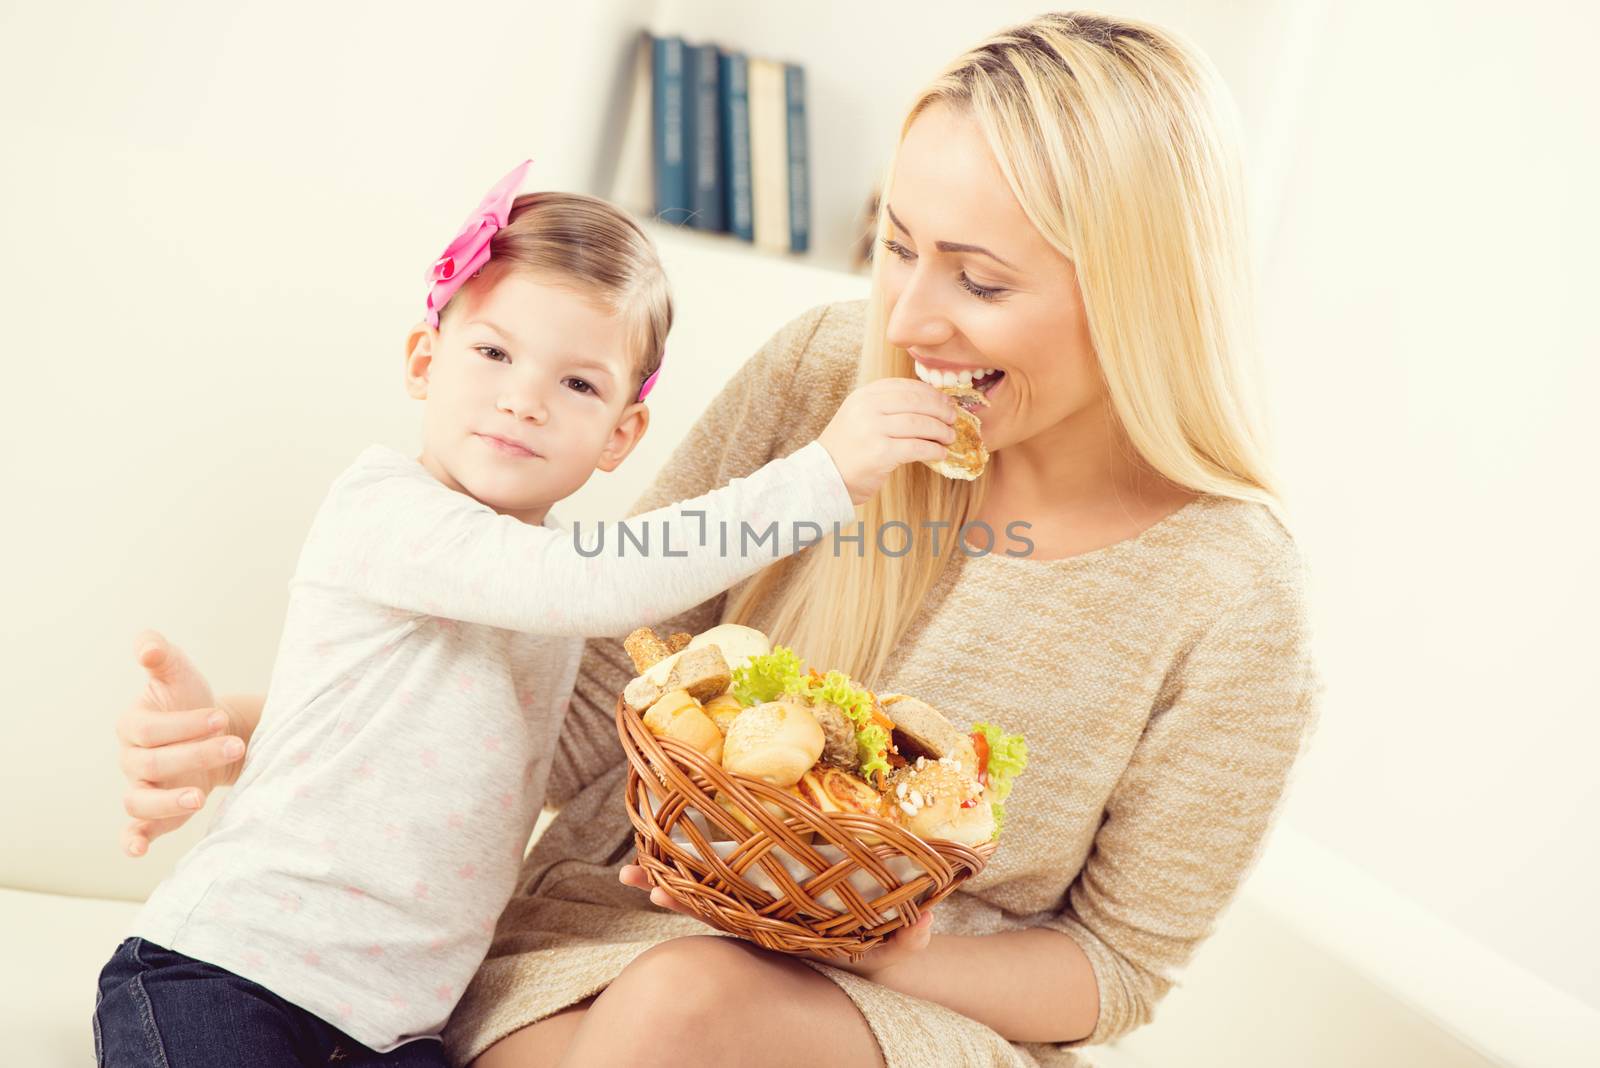 Cute little girl feeding pretty mom with pastries from woven baskets.